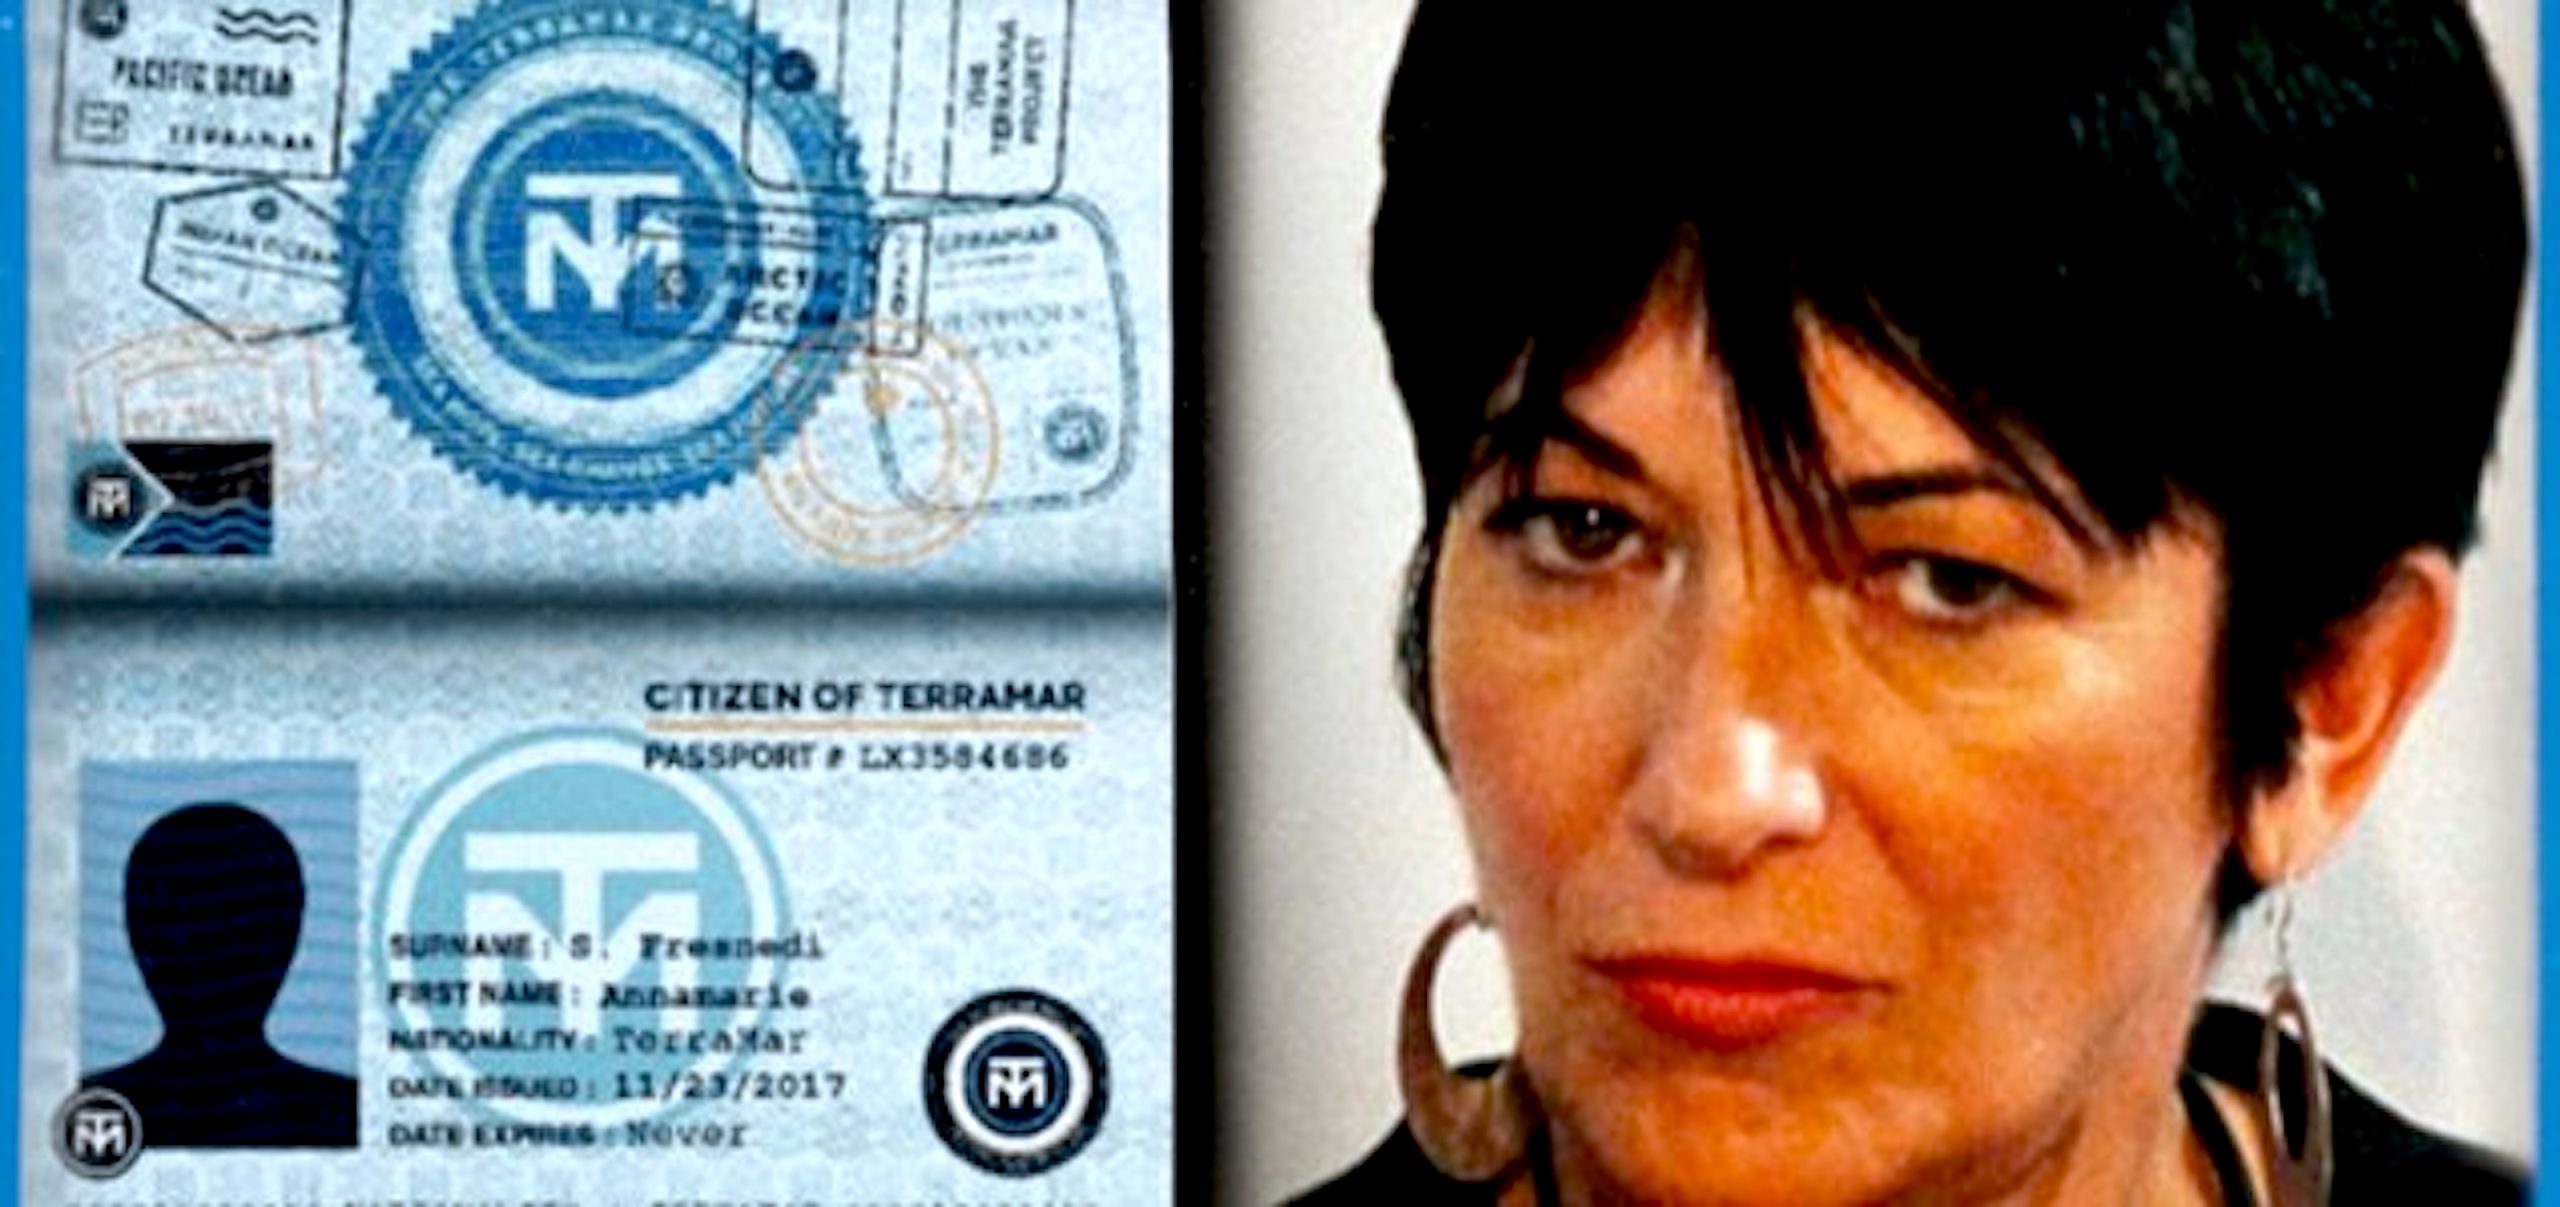 Ghislaine-Maxwell-with-TERRAMAR-PROJECT-passport-foto-The-Duran-scaled